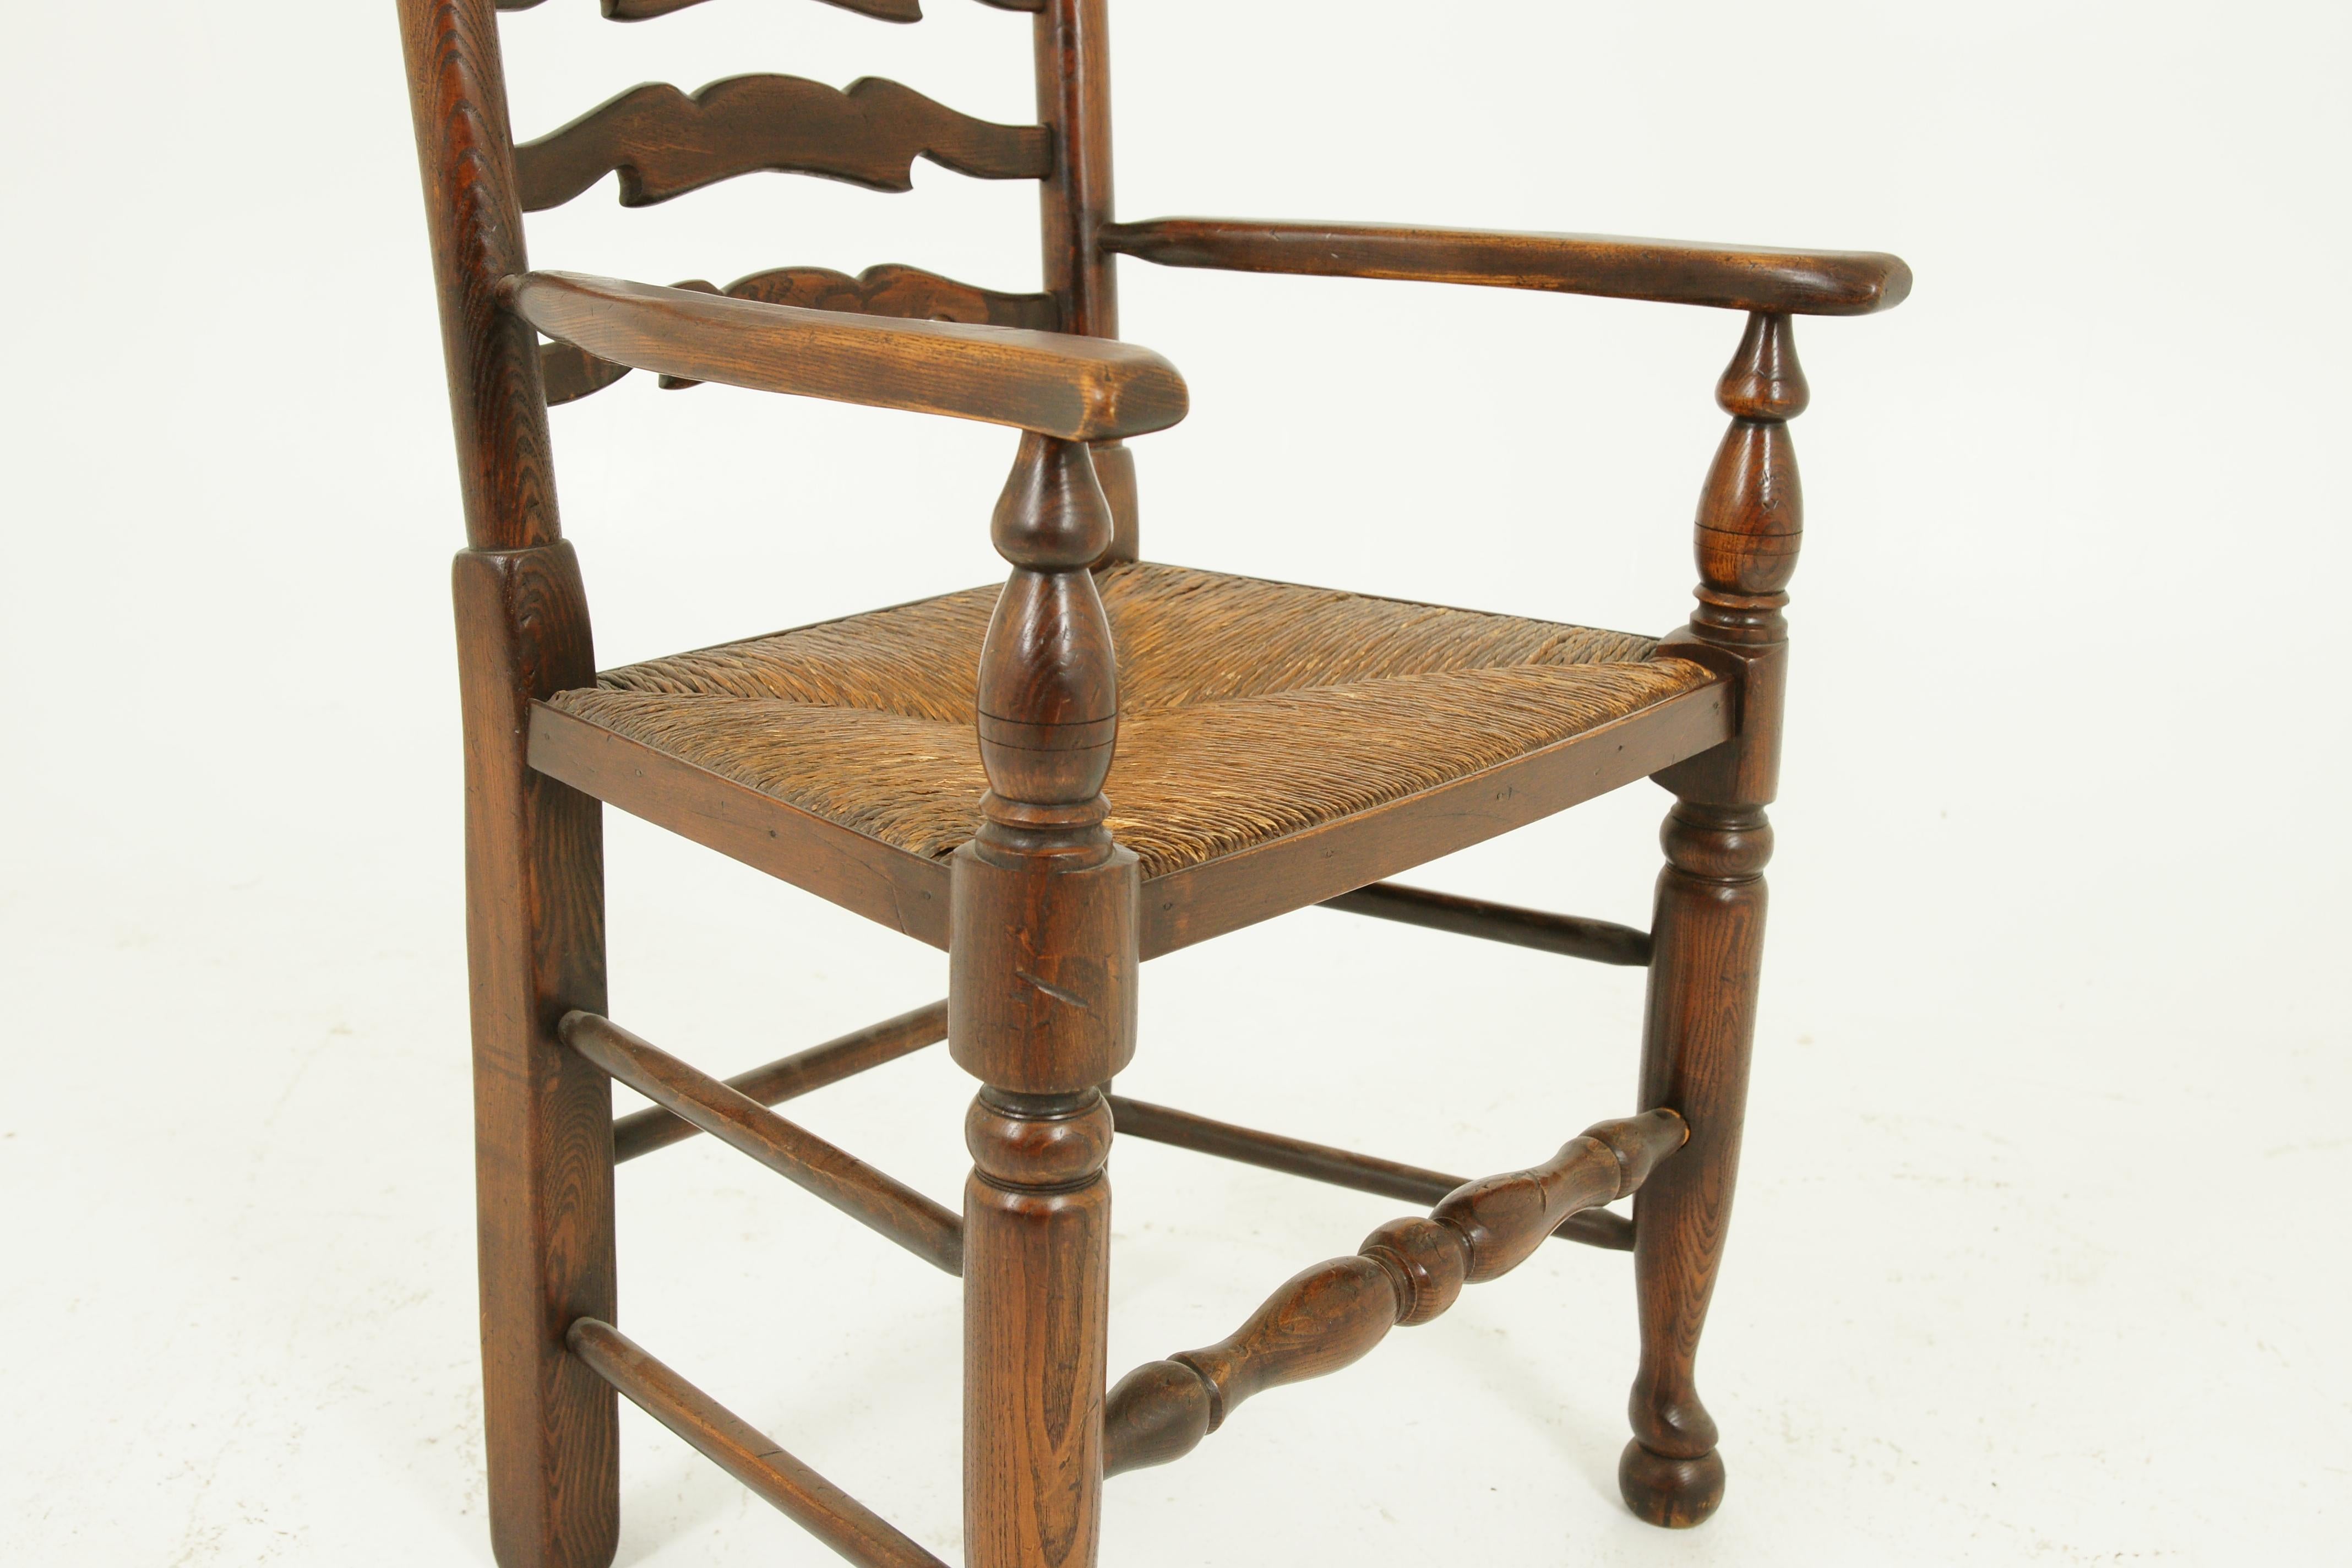 Hand-Crafted Antique Ladder-Back Chair, Rush Seat, Elm, Scotland 1920, B1154